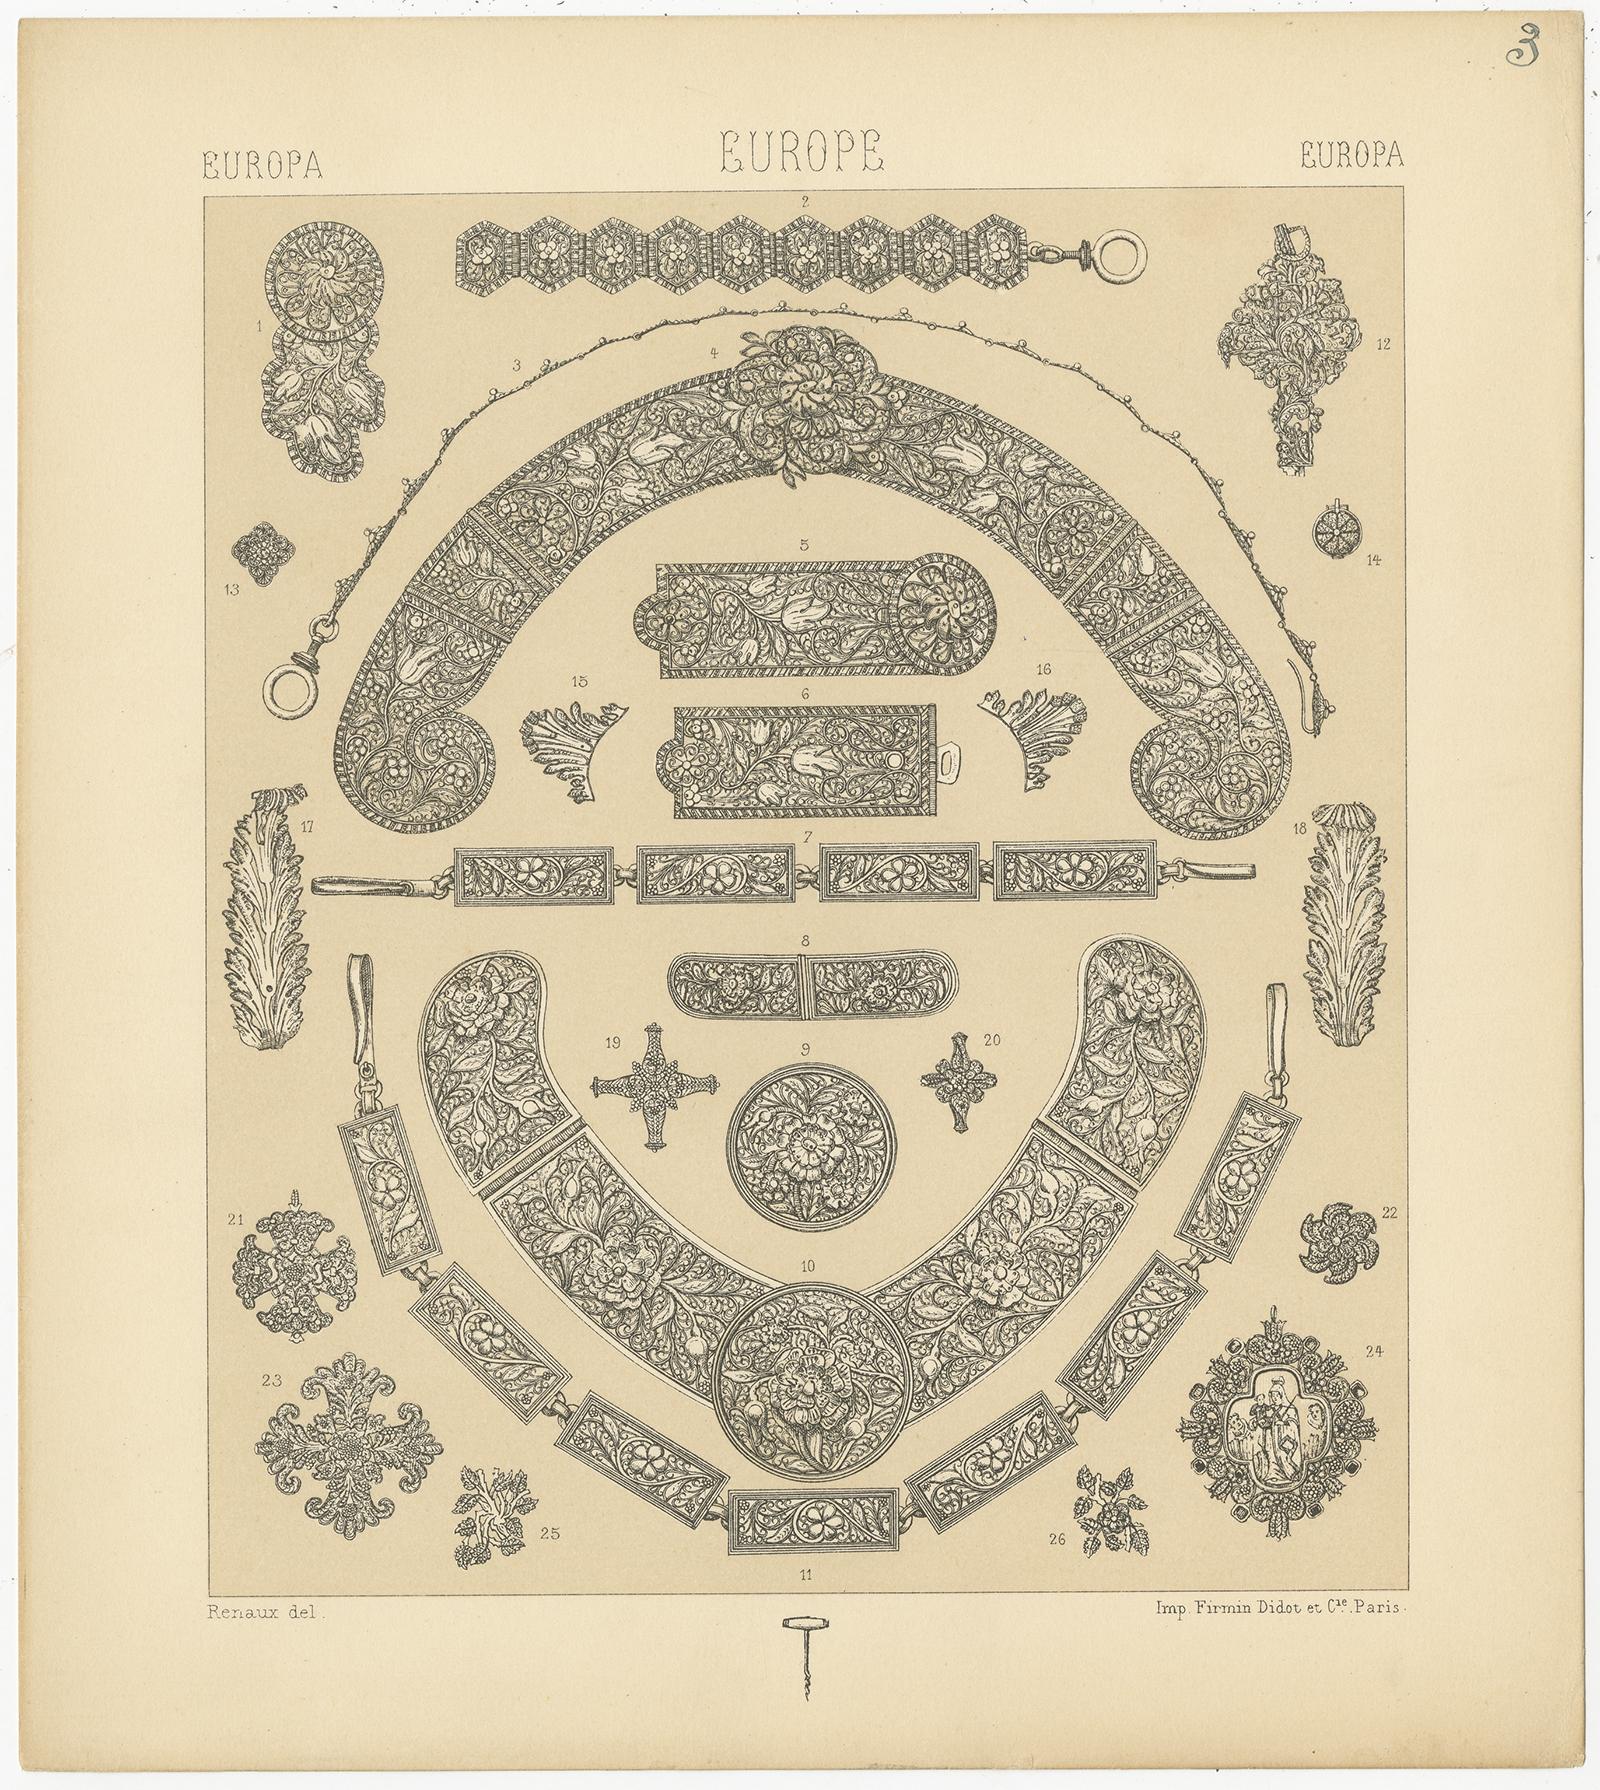 Antique print titled 'Europa- Europe - Europa'. Chromolithograph of European Decorative Objects. This print originates from 'Le Costume Historique' by M.A. Racinet. Published, circa 1880.